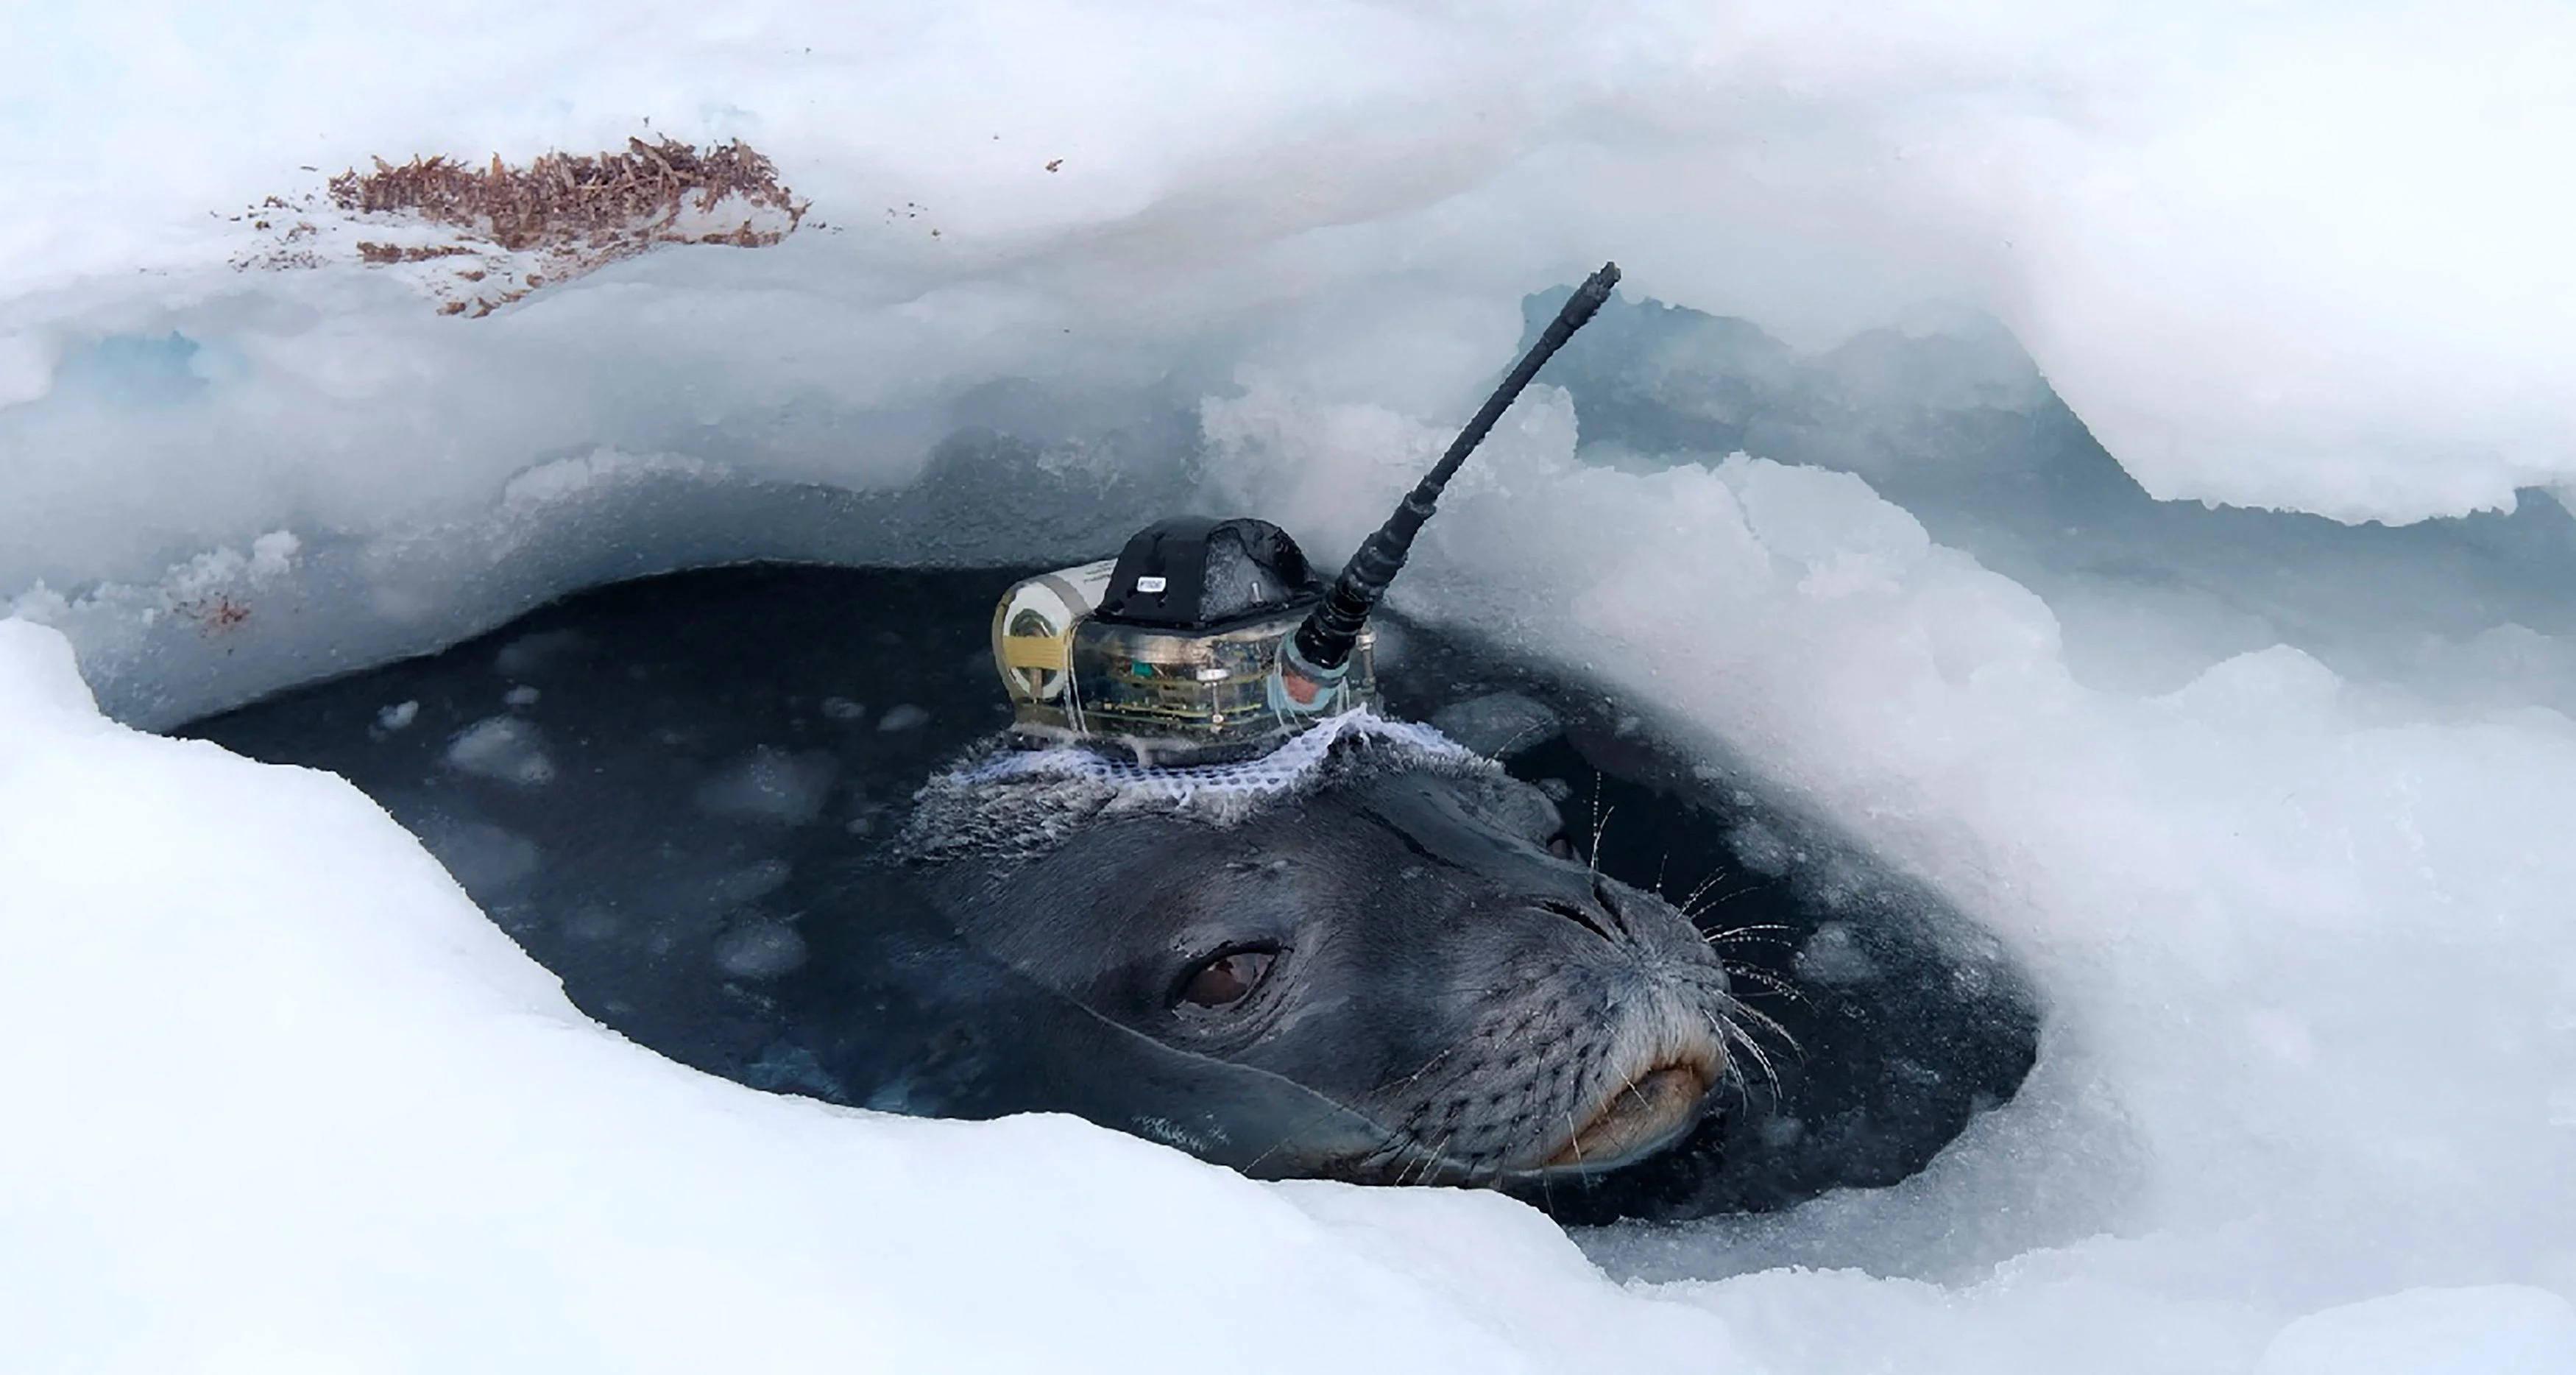 research seal (National Institute of Polar Research/Handout via REUTERS)